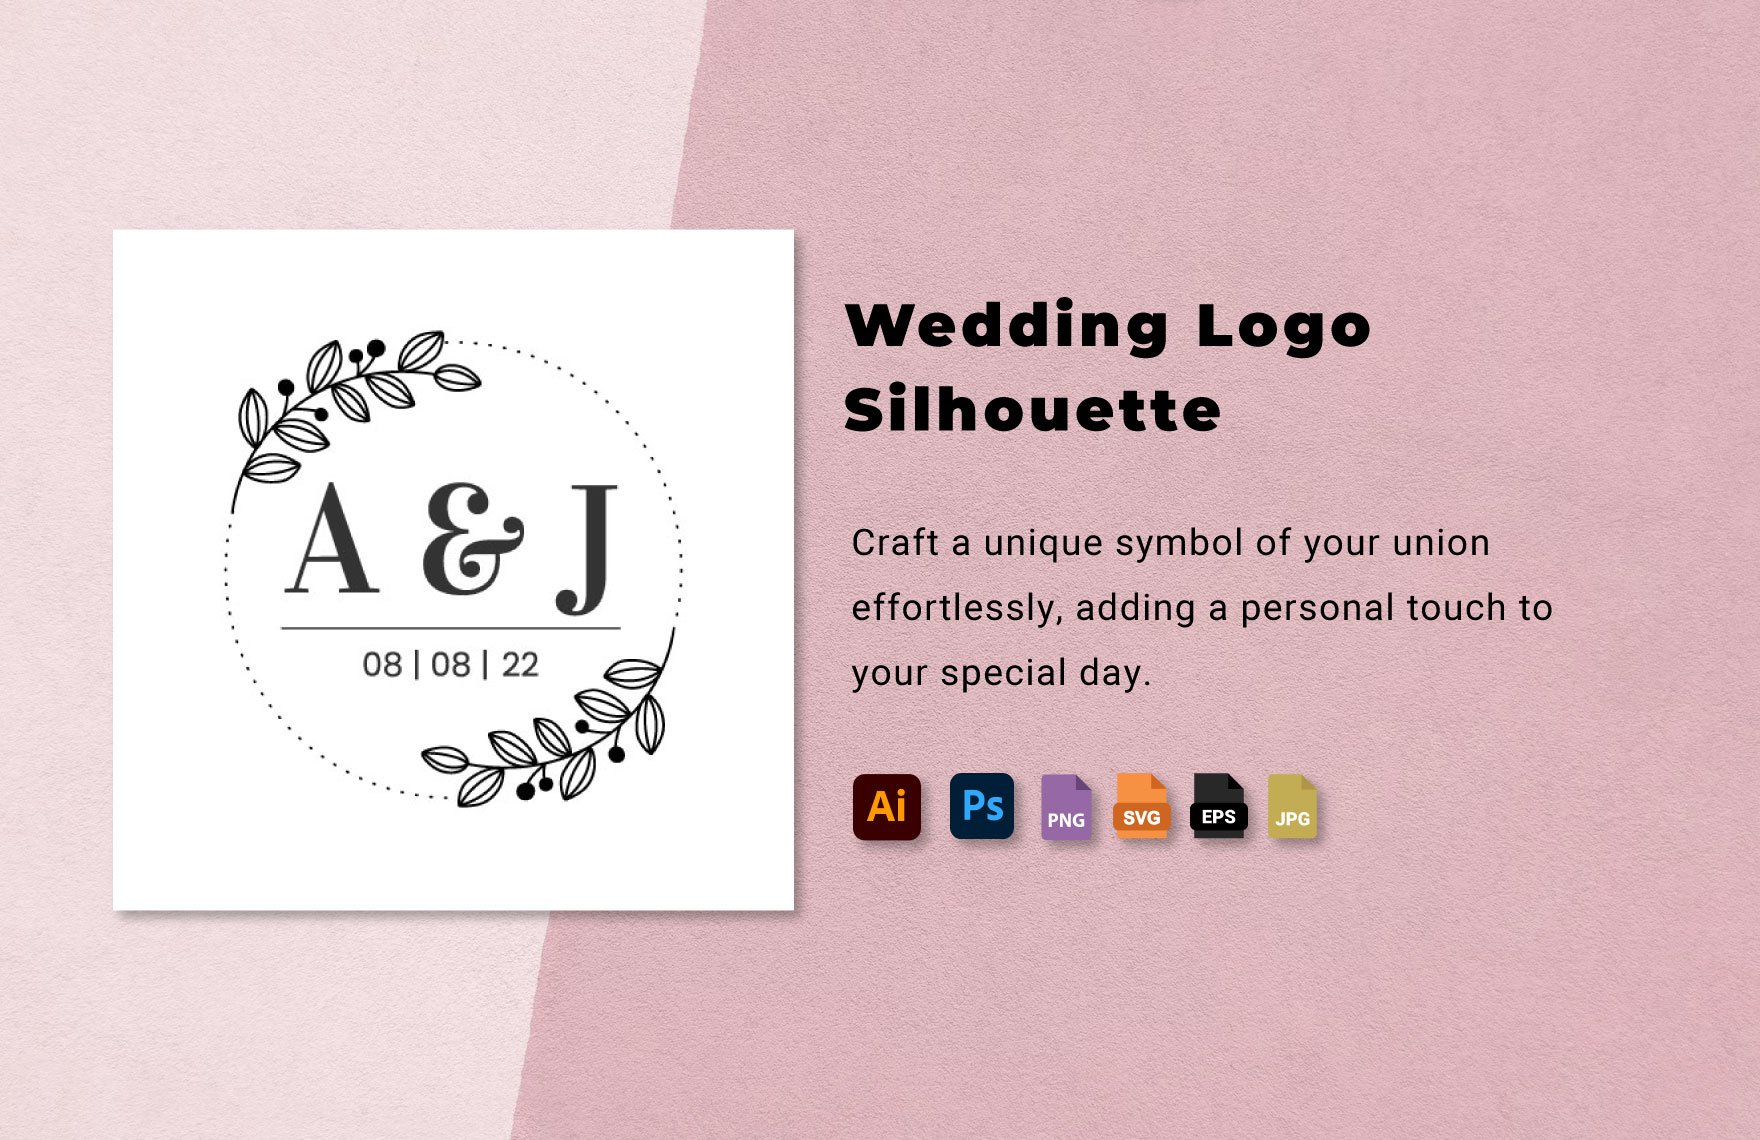 SP Initials Letter Wedding Monogram Logos Template, Hand Drawn Modern  Minimalistic and Floral Templates for Invitation Cards, Save Stock Vector -  Illustration of painted, calligraphic: 255700658